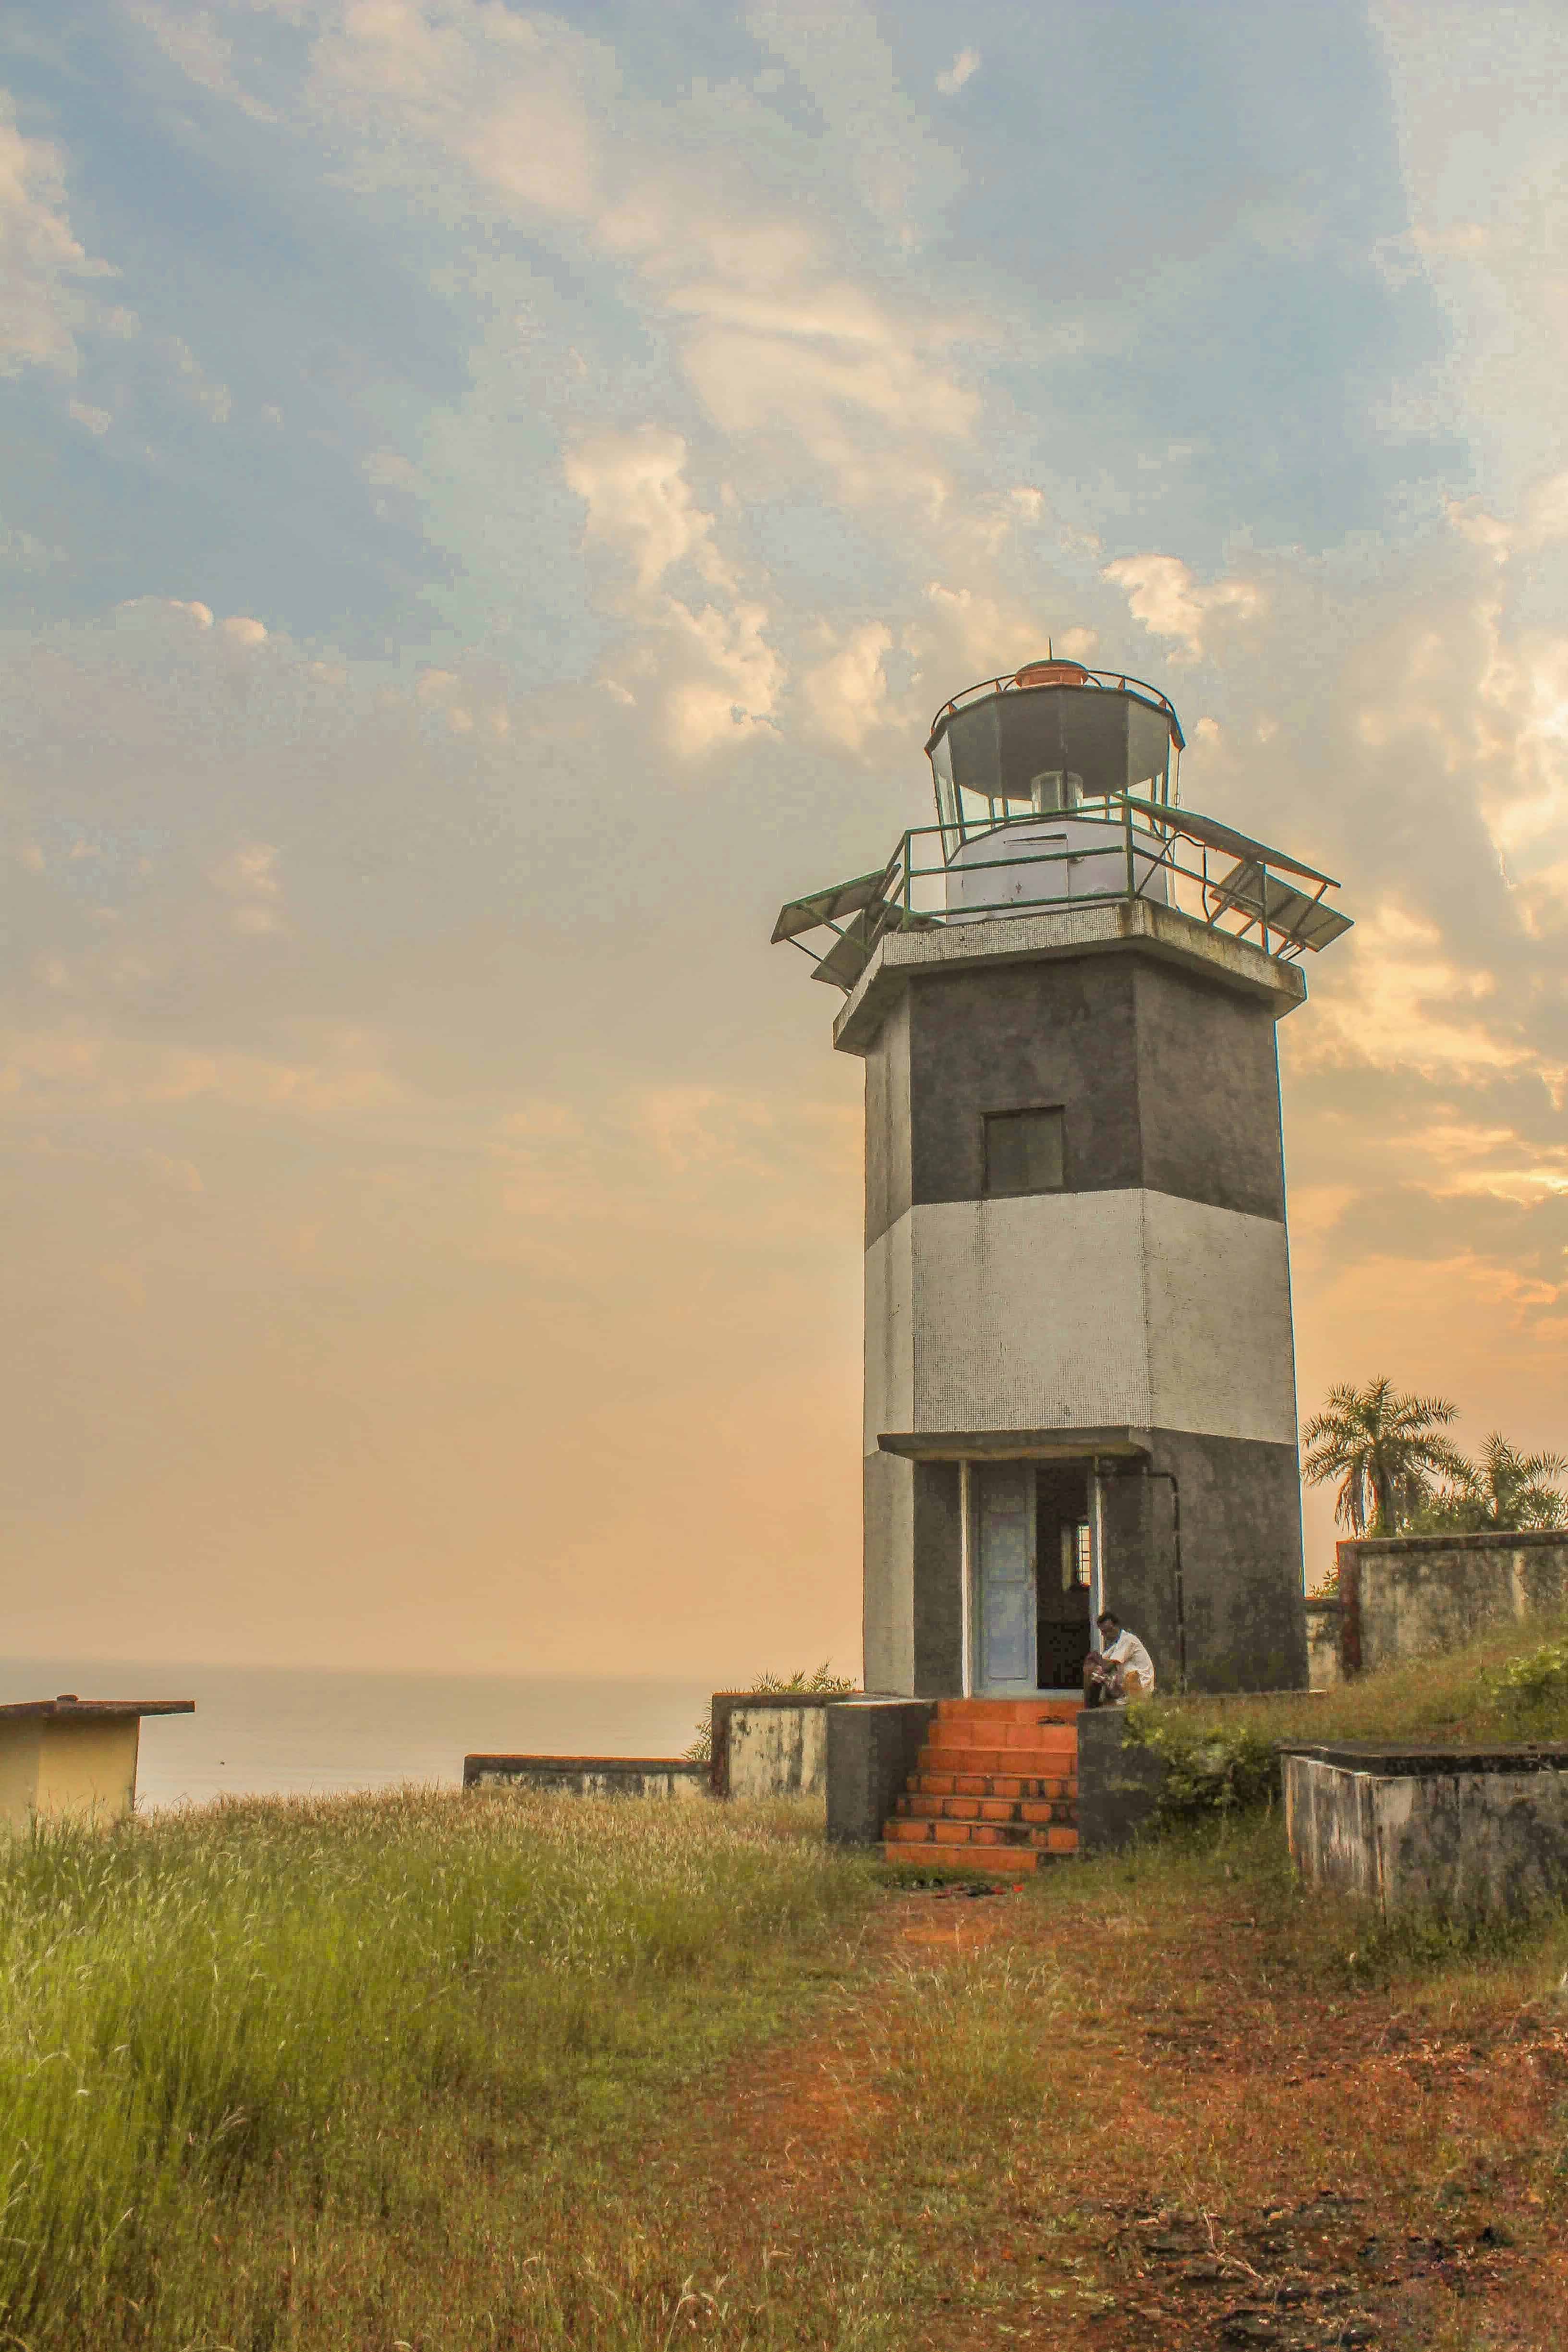 Gokarna Lighthouse- Lesser known but beautiful place to visit in Gokarna